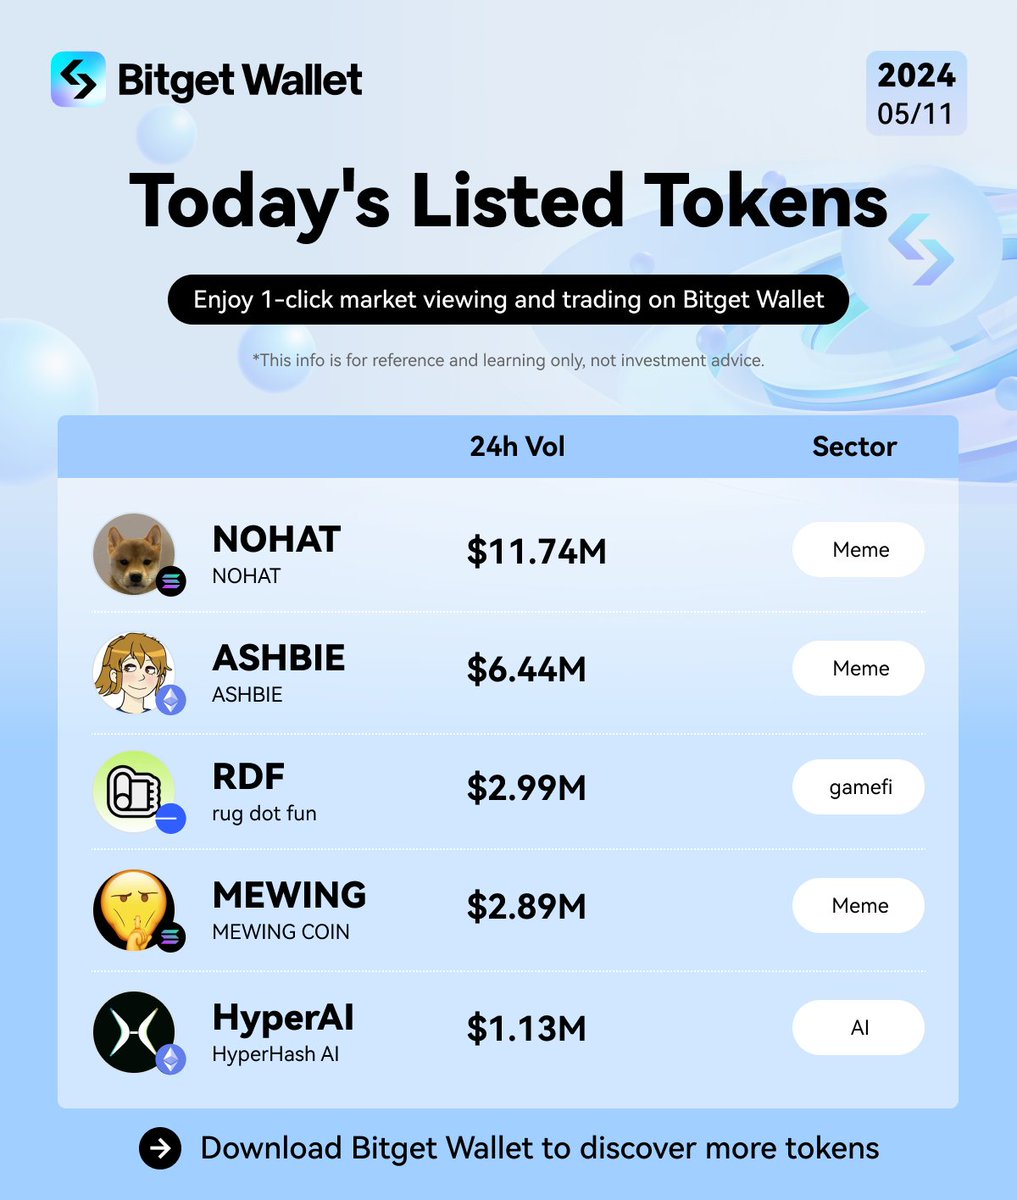 🚀 Our new token listings are out! Surprised by the trading volume of these #coins? Check them out: $RDF $NOHAT $HyperAI $ASHBIE $MEWING @rugdotfun @nohatsolana @HyperHashAI @ASHBIEcoinether @MewingOnSolana #Meme #Gamefi #MemeCoinSeason #Trending #BNBChain #Solana #BitgetWallet…